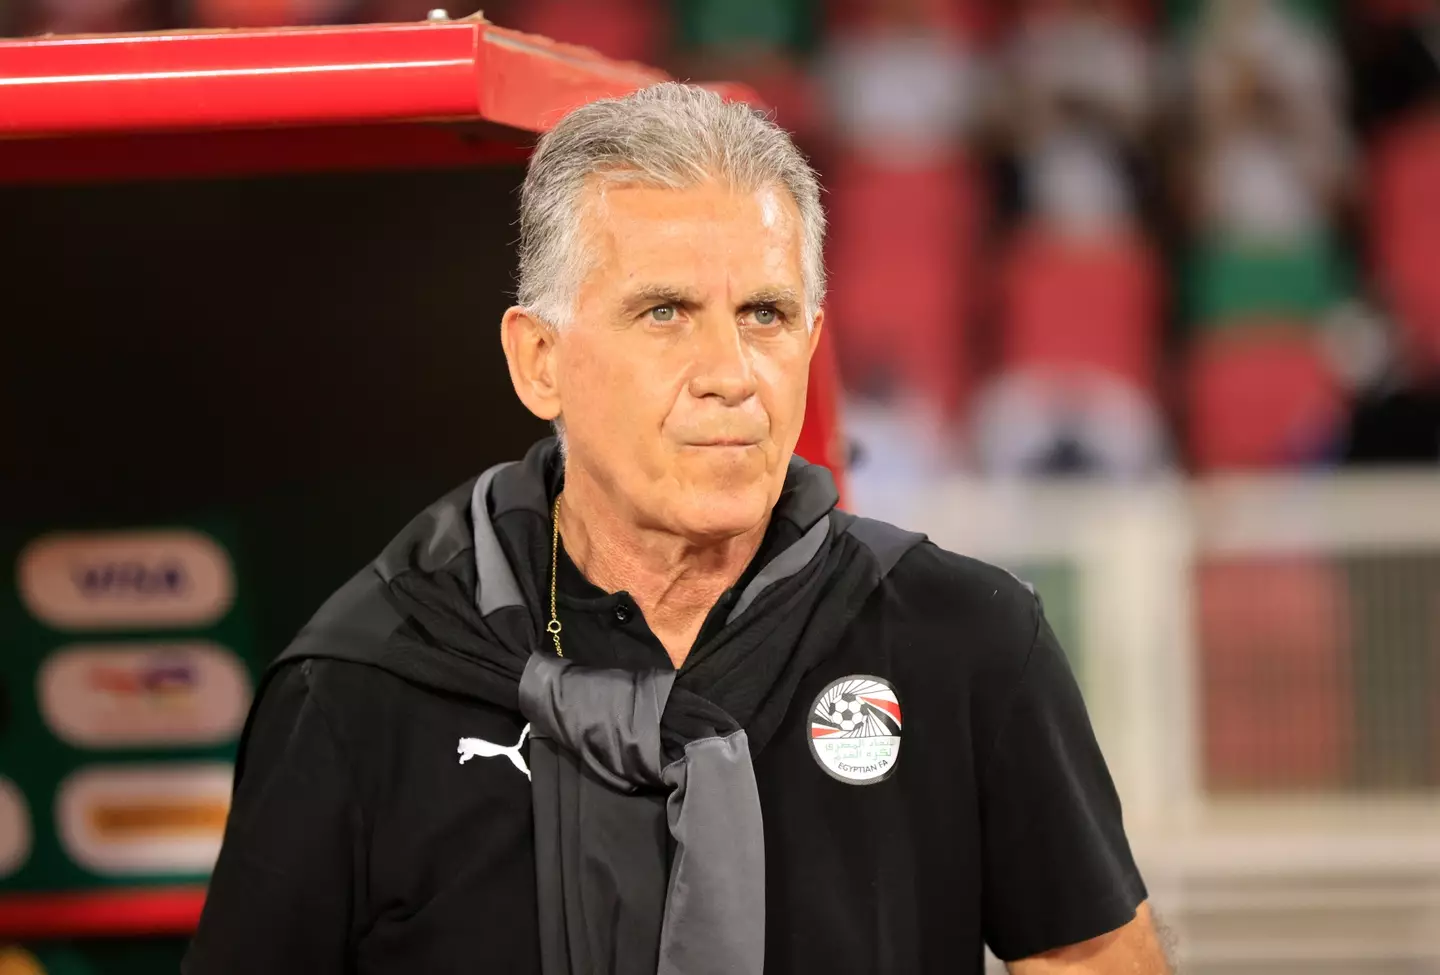 Queiroz failed to win the African Nations League or qualify for the World Cup with Egypt before going back to Iran. Image: Alamy